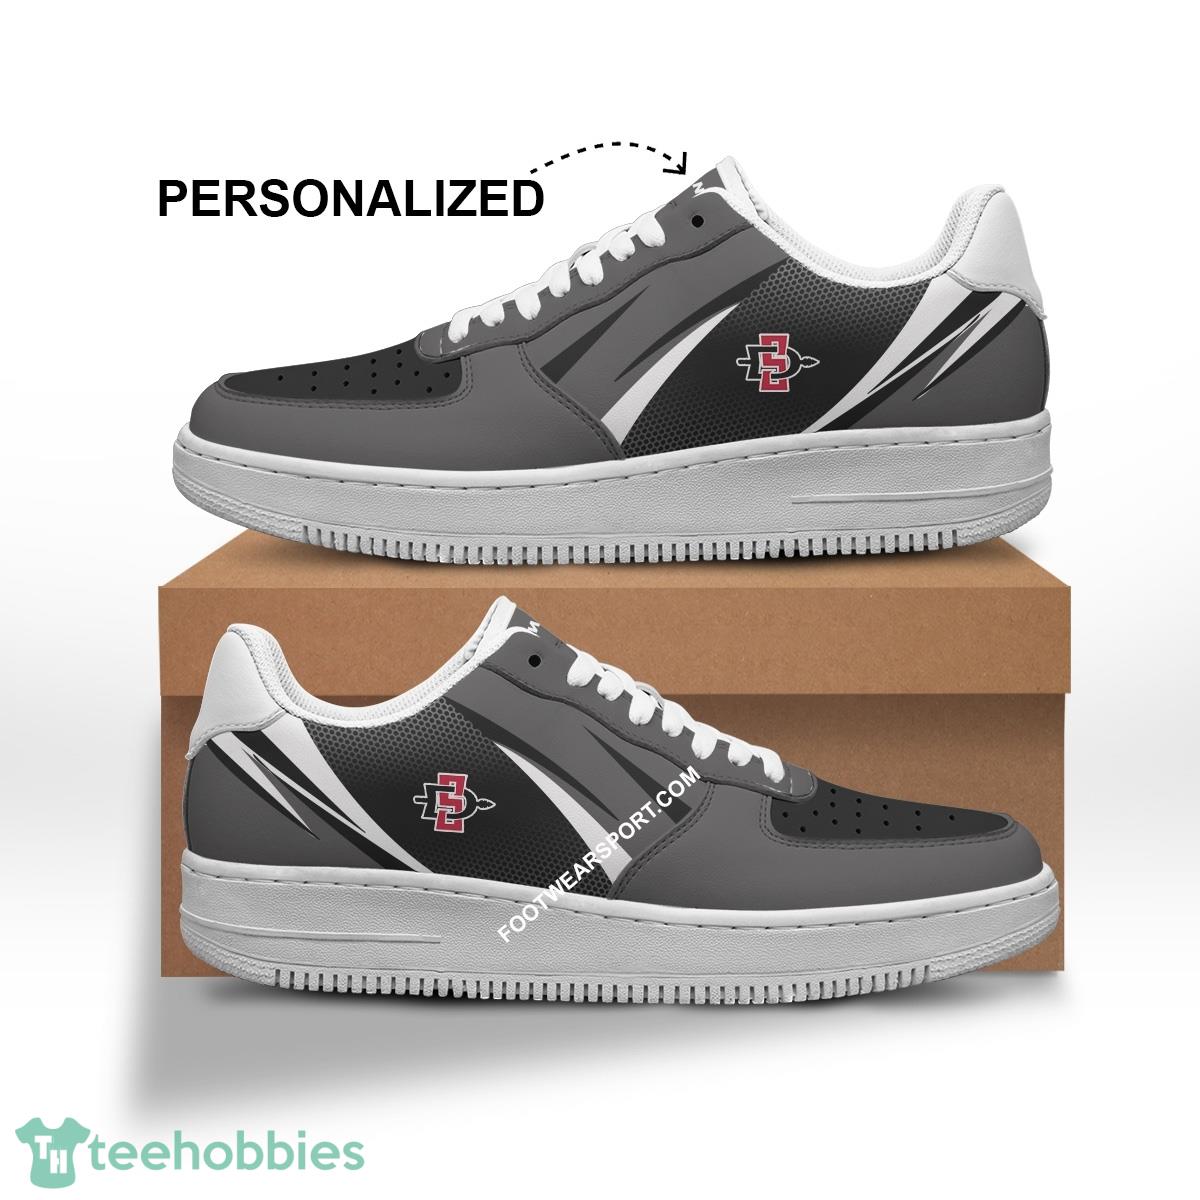 Custom Name San Diego State Aztecs Air Force 1 Shoes Trending Design For Fans Gift - NCAA San Diego State Aztecs Air Force 1 Shoes Personalized Style 1